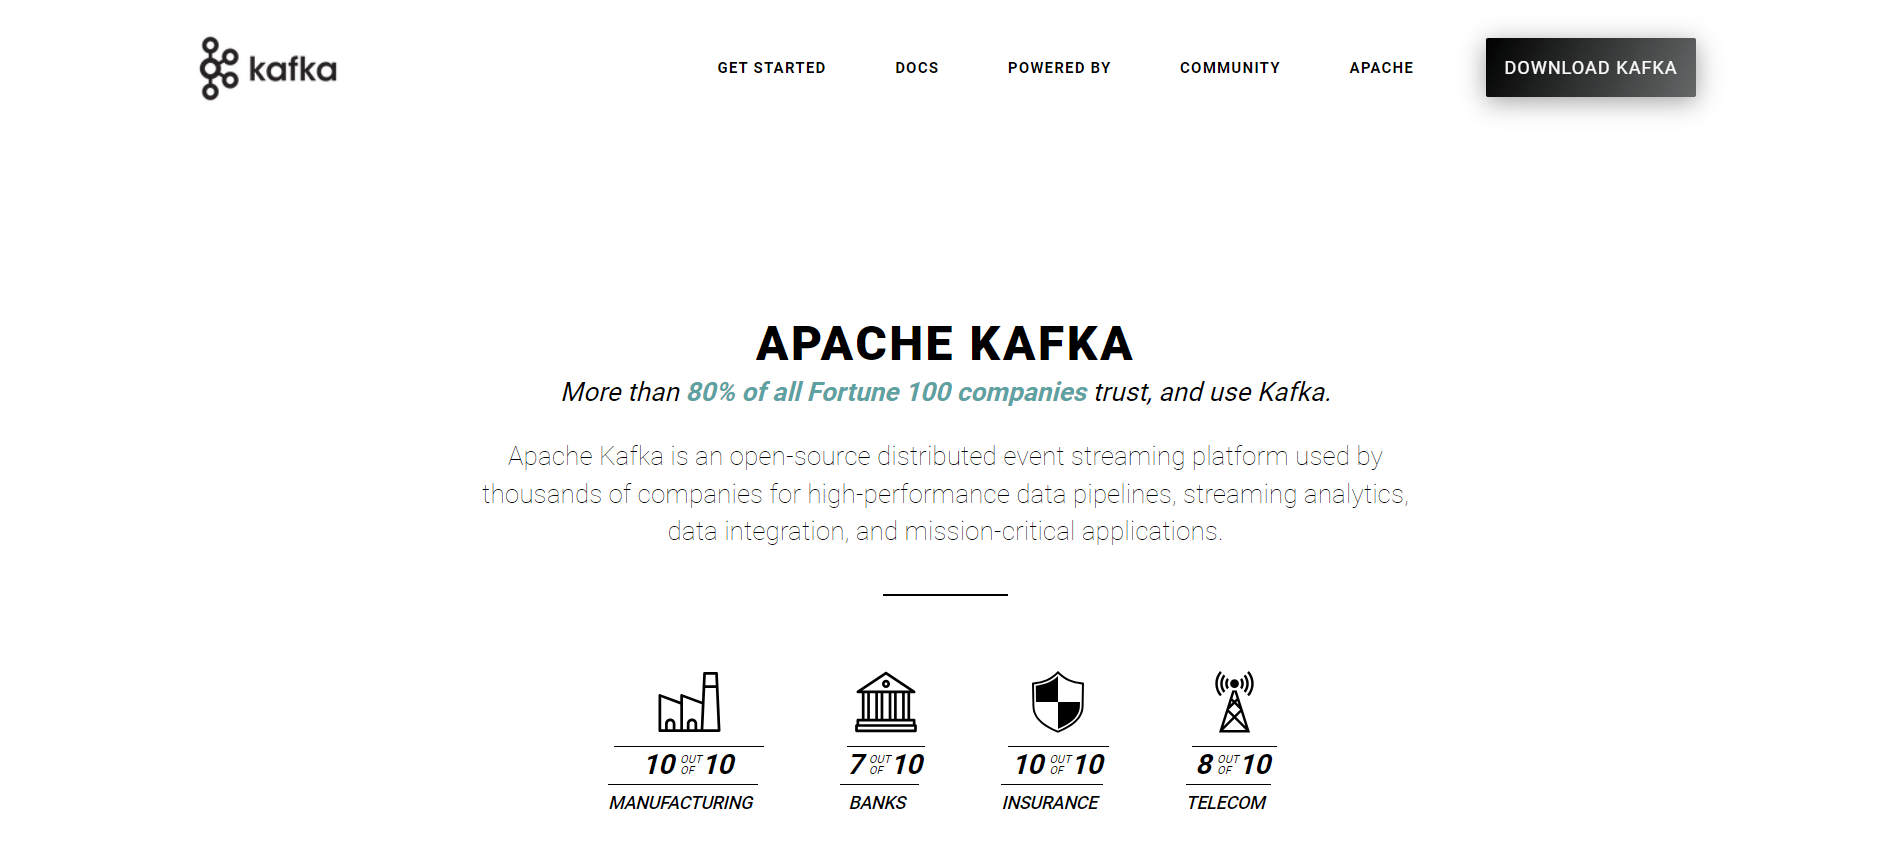 Apache Kafka dashboard that says 'More than 80% of all Fortune 100 companies trust, ad use Kafka'